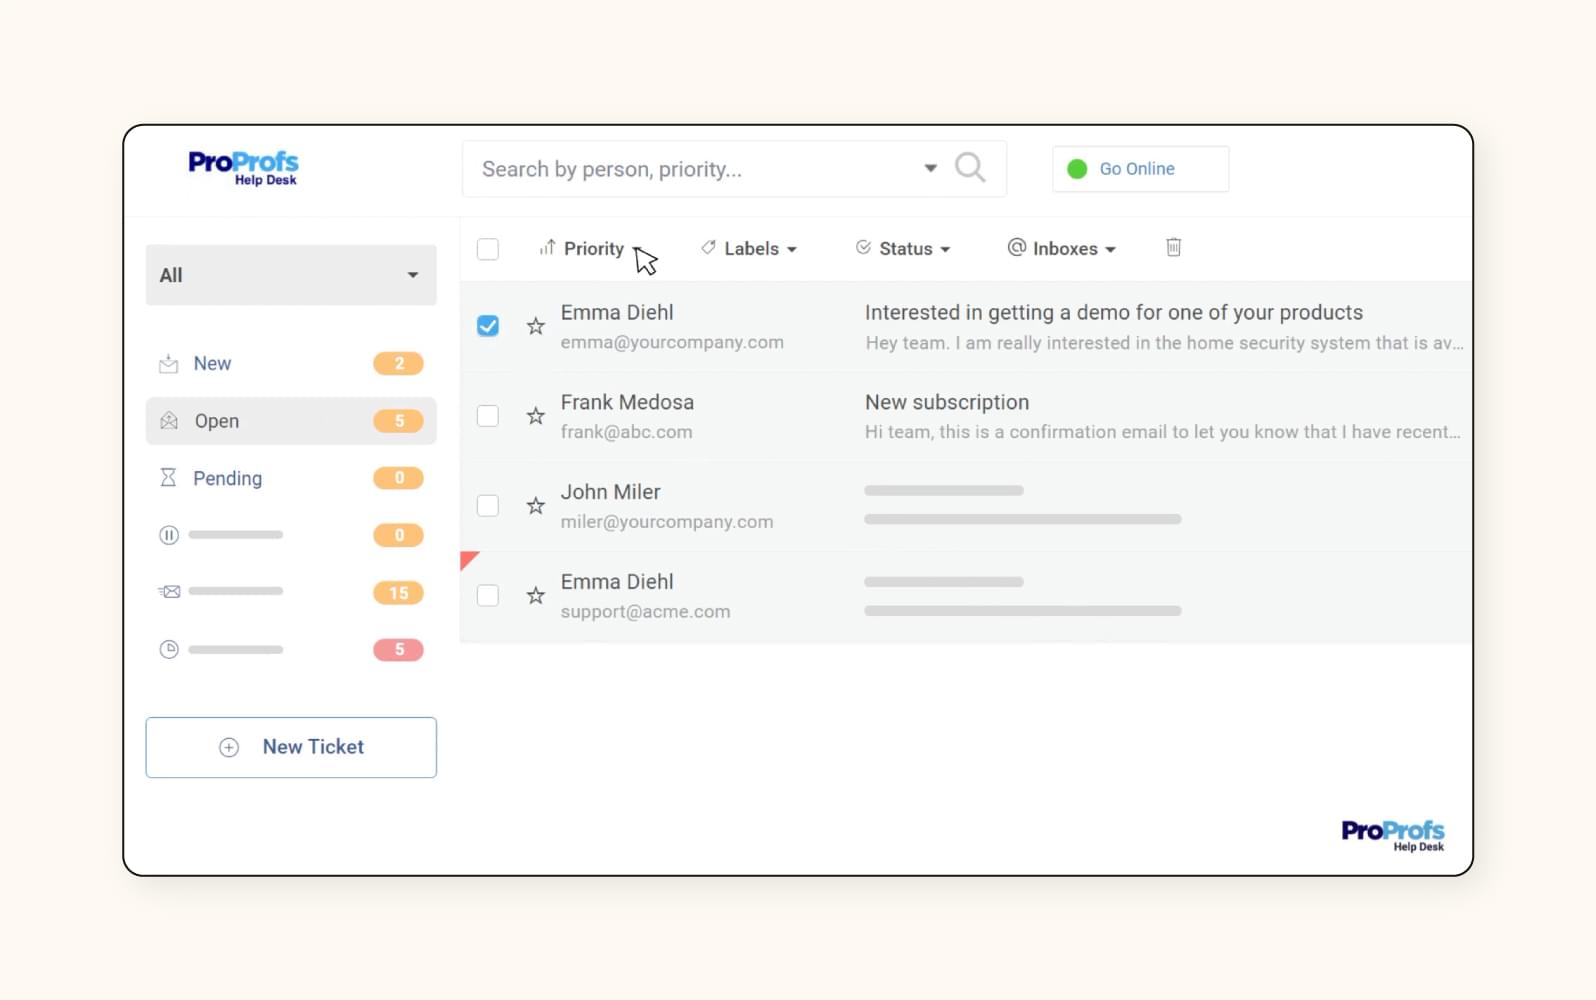 A screenshot shows the ProProfs Help Desk customer service software and its shared inbox.